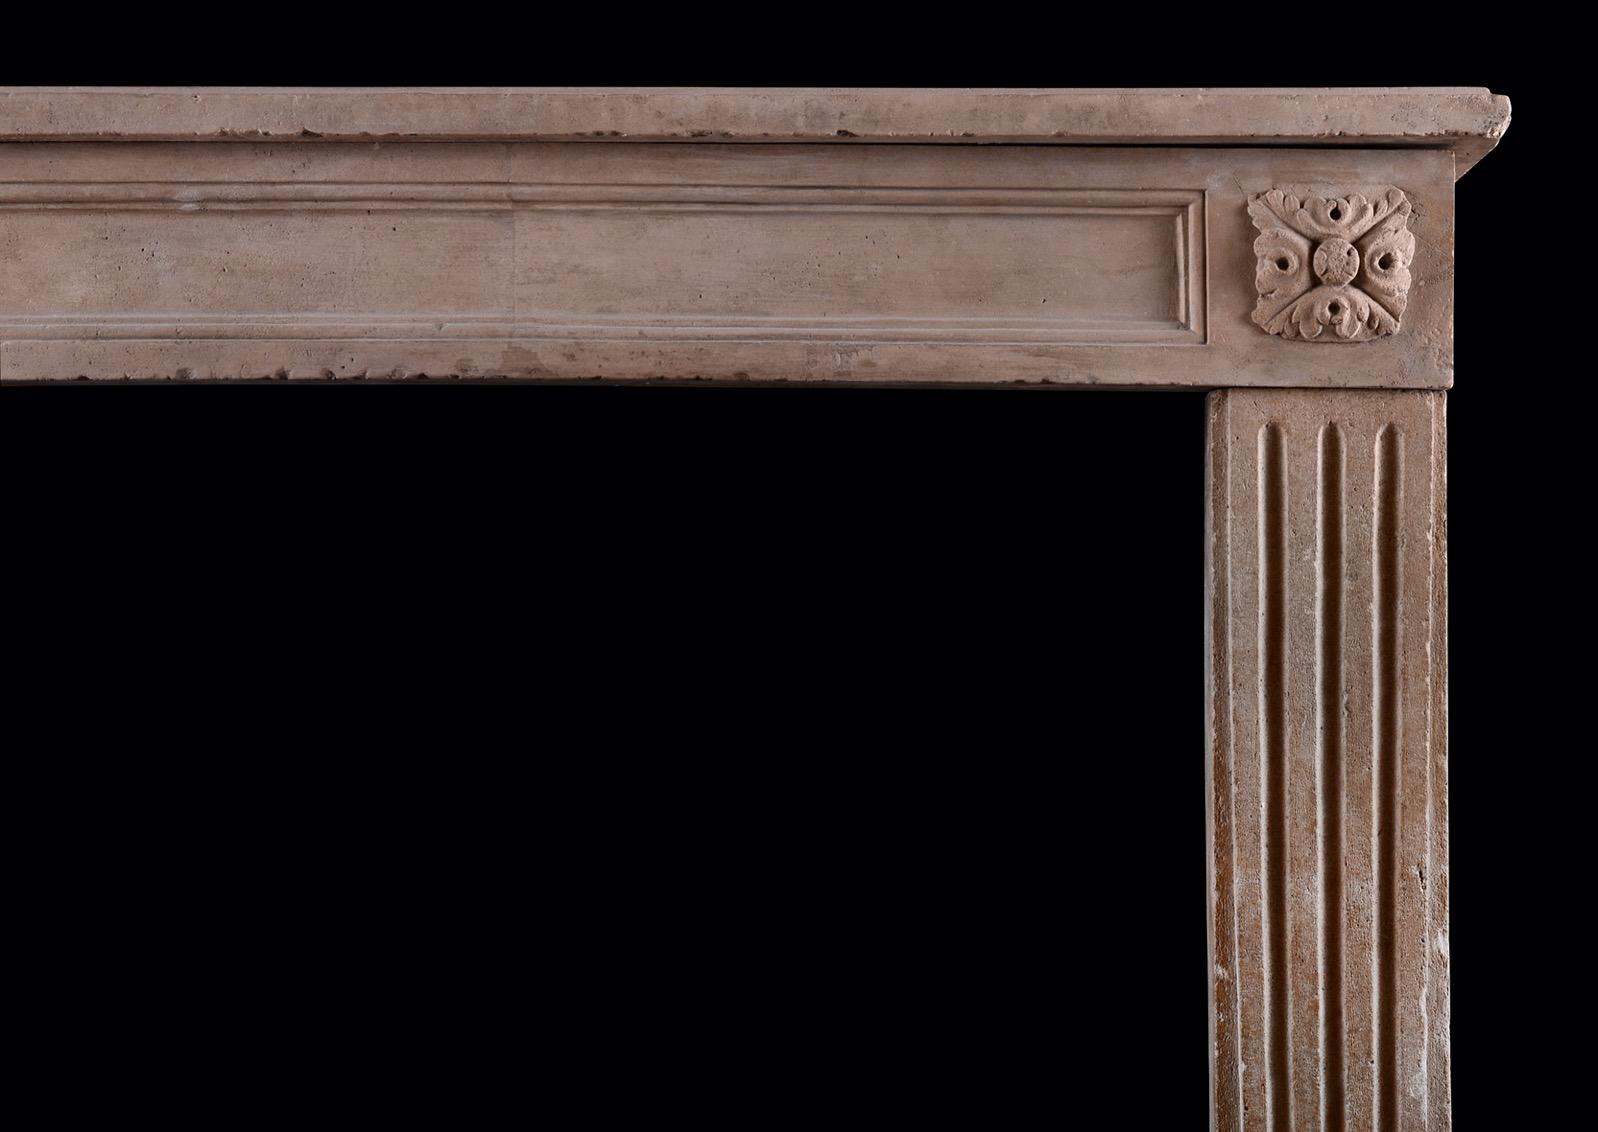 A petite French limestone fireplace in the Louis XVI manner. The jambs with tapering stop-fluted pilasters, the frieze with central panel flanked by carved paterae. Scalloped shelf above. A small scale, well suited for bedroom or smaller study.